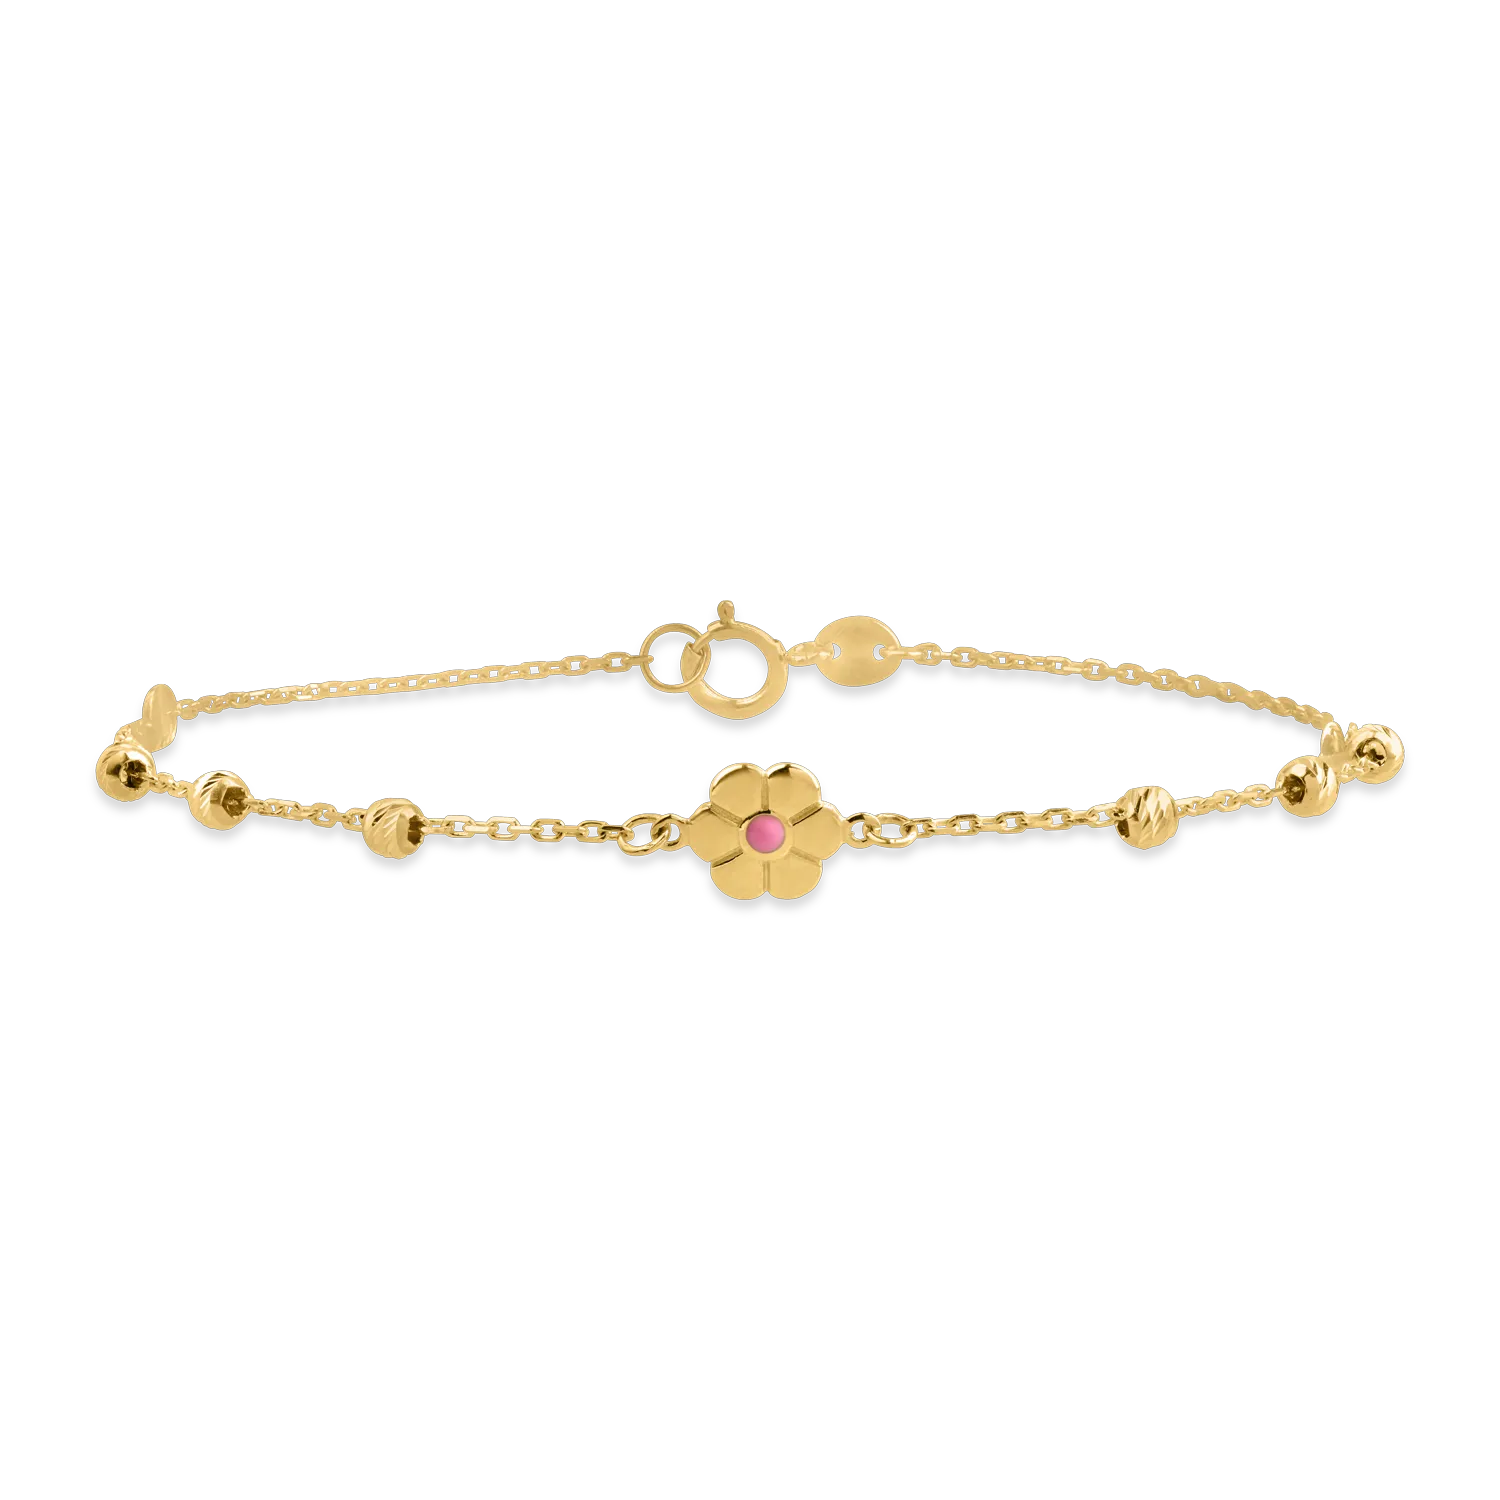 Yellow gold bracelet with beads and flower pendant